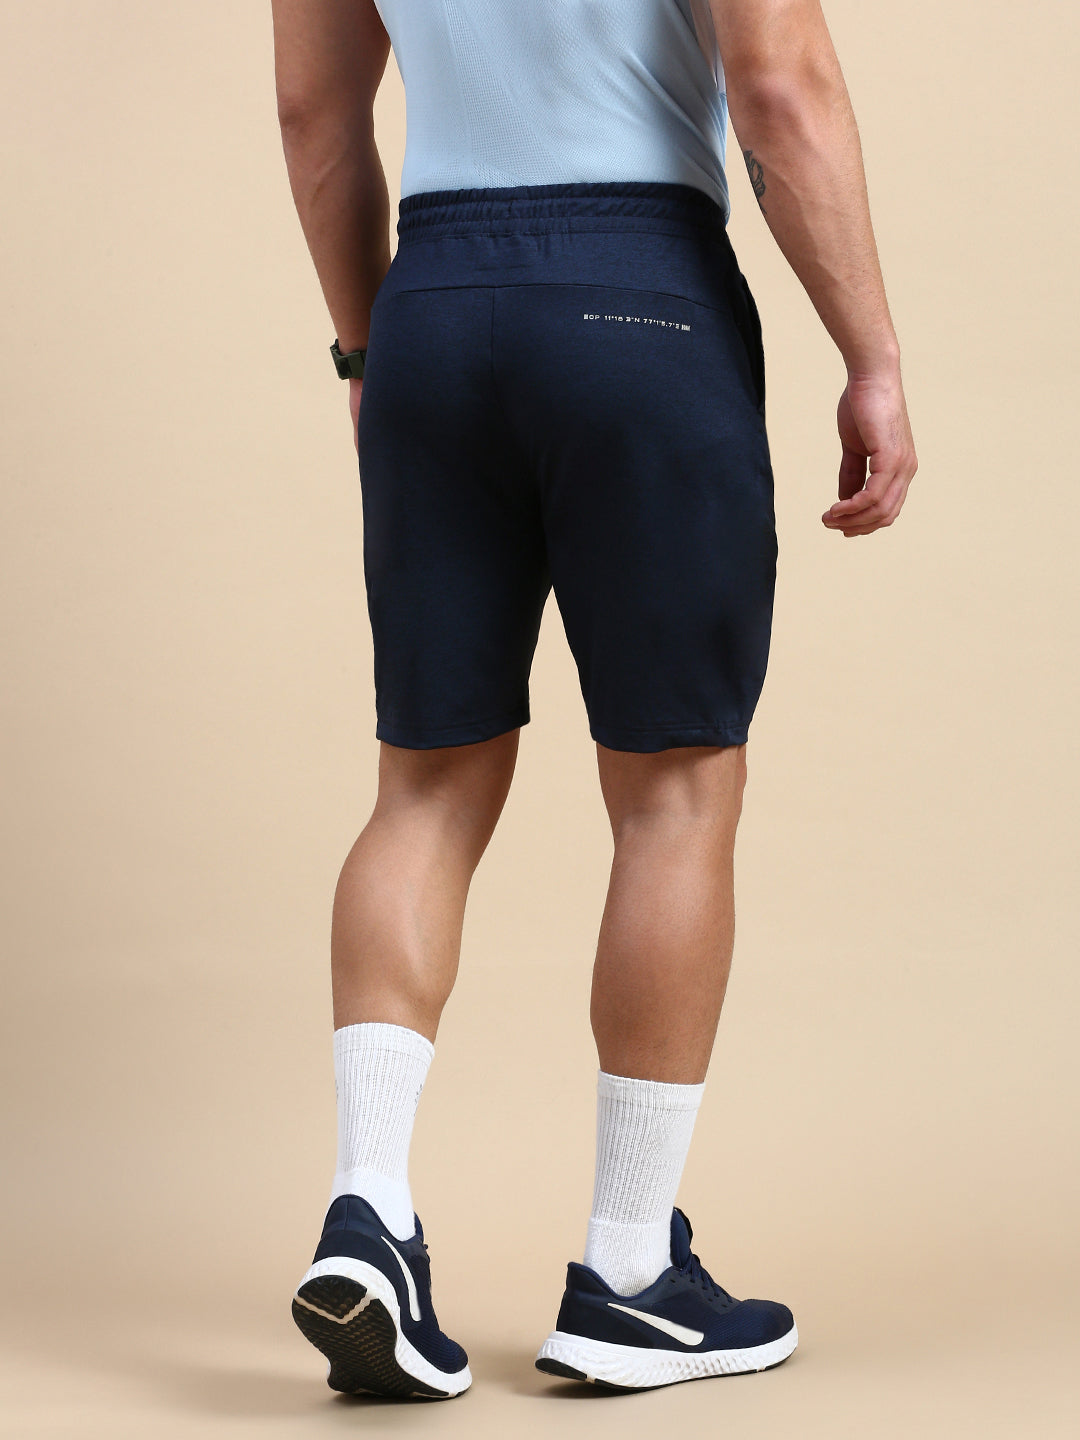 Classic Polo Men's Bottom Polyester Navy Blue Slim Fit Active Wear Shorts